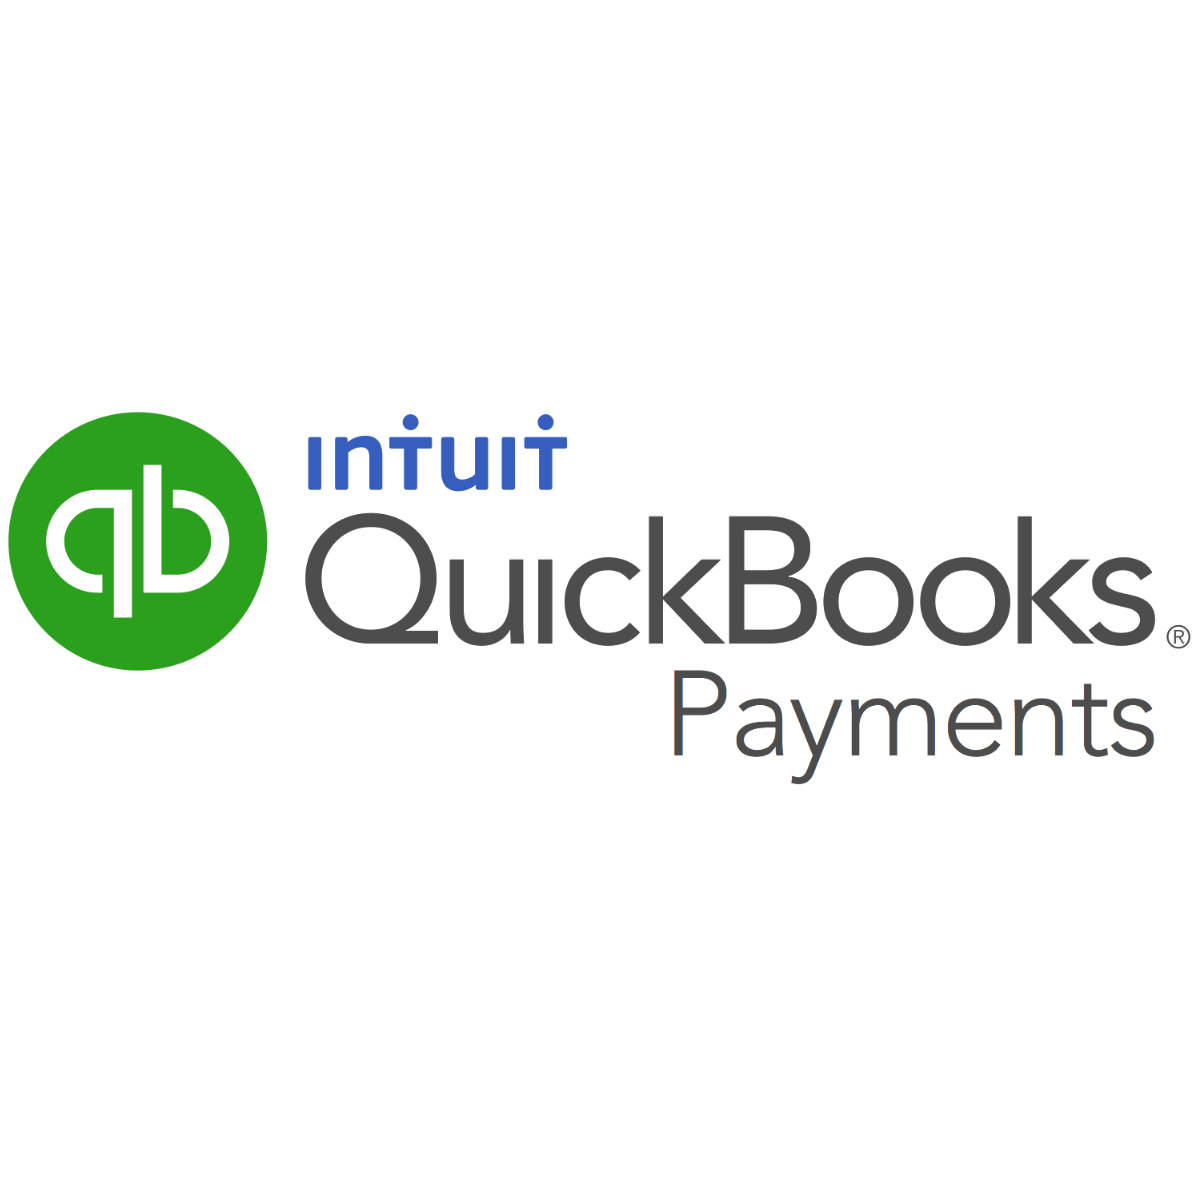 quickbooks download credit card charges what banks